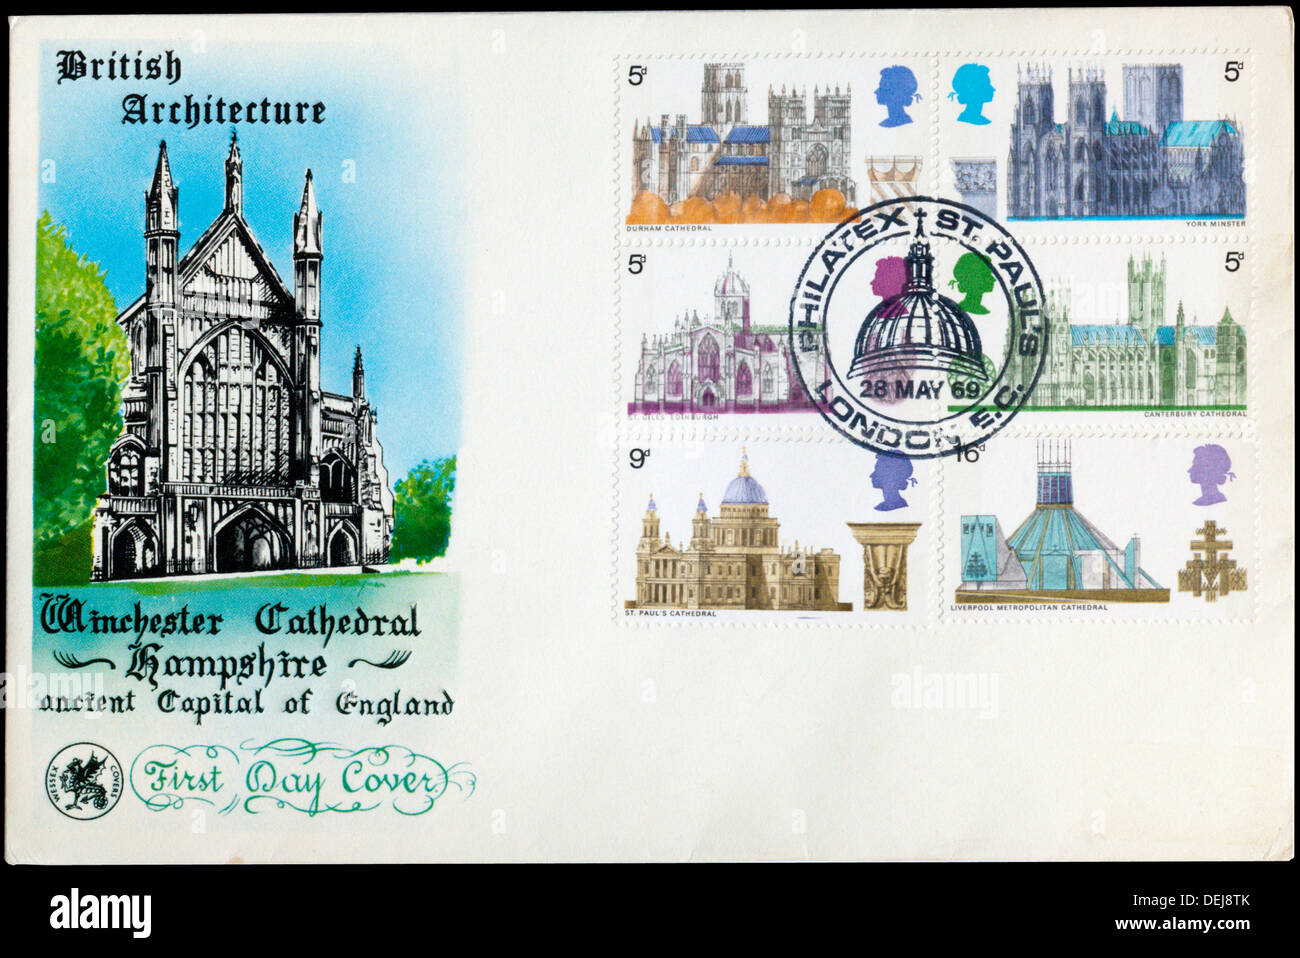 First Day Cover celebrating British Architecture. Stock Photo